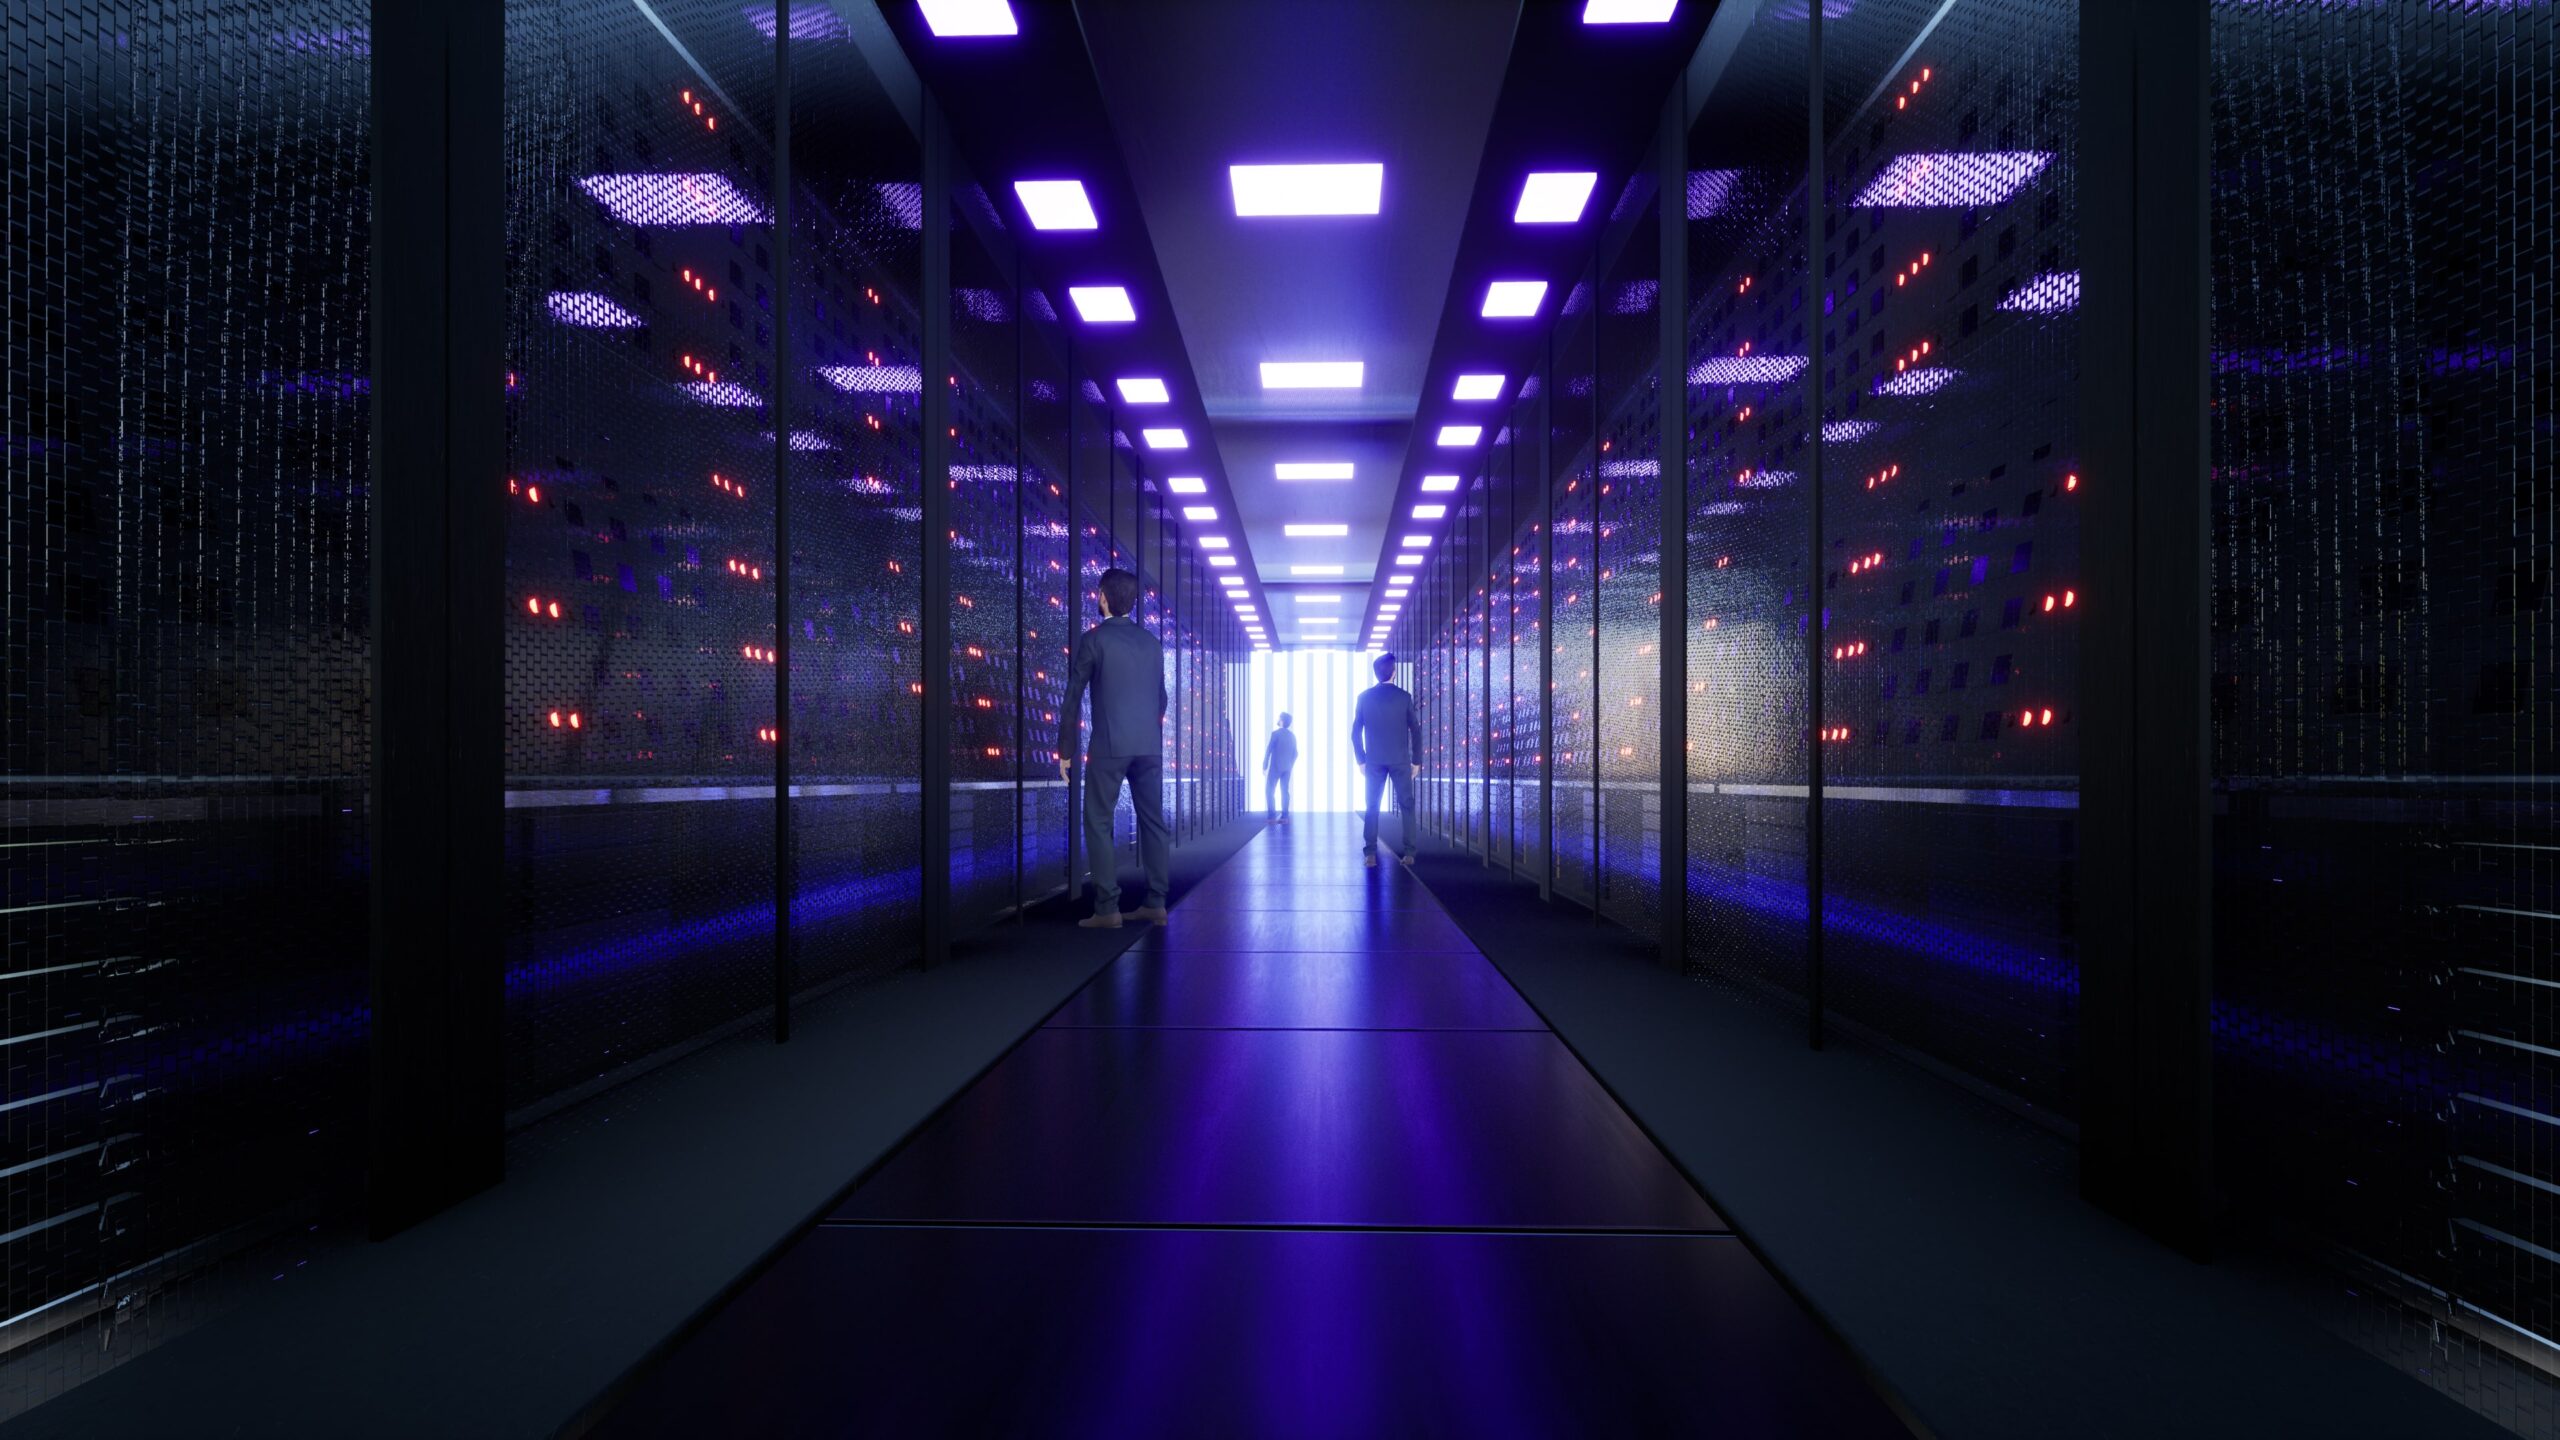 three small human figures in a large data center